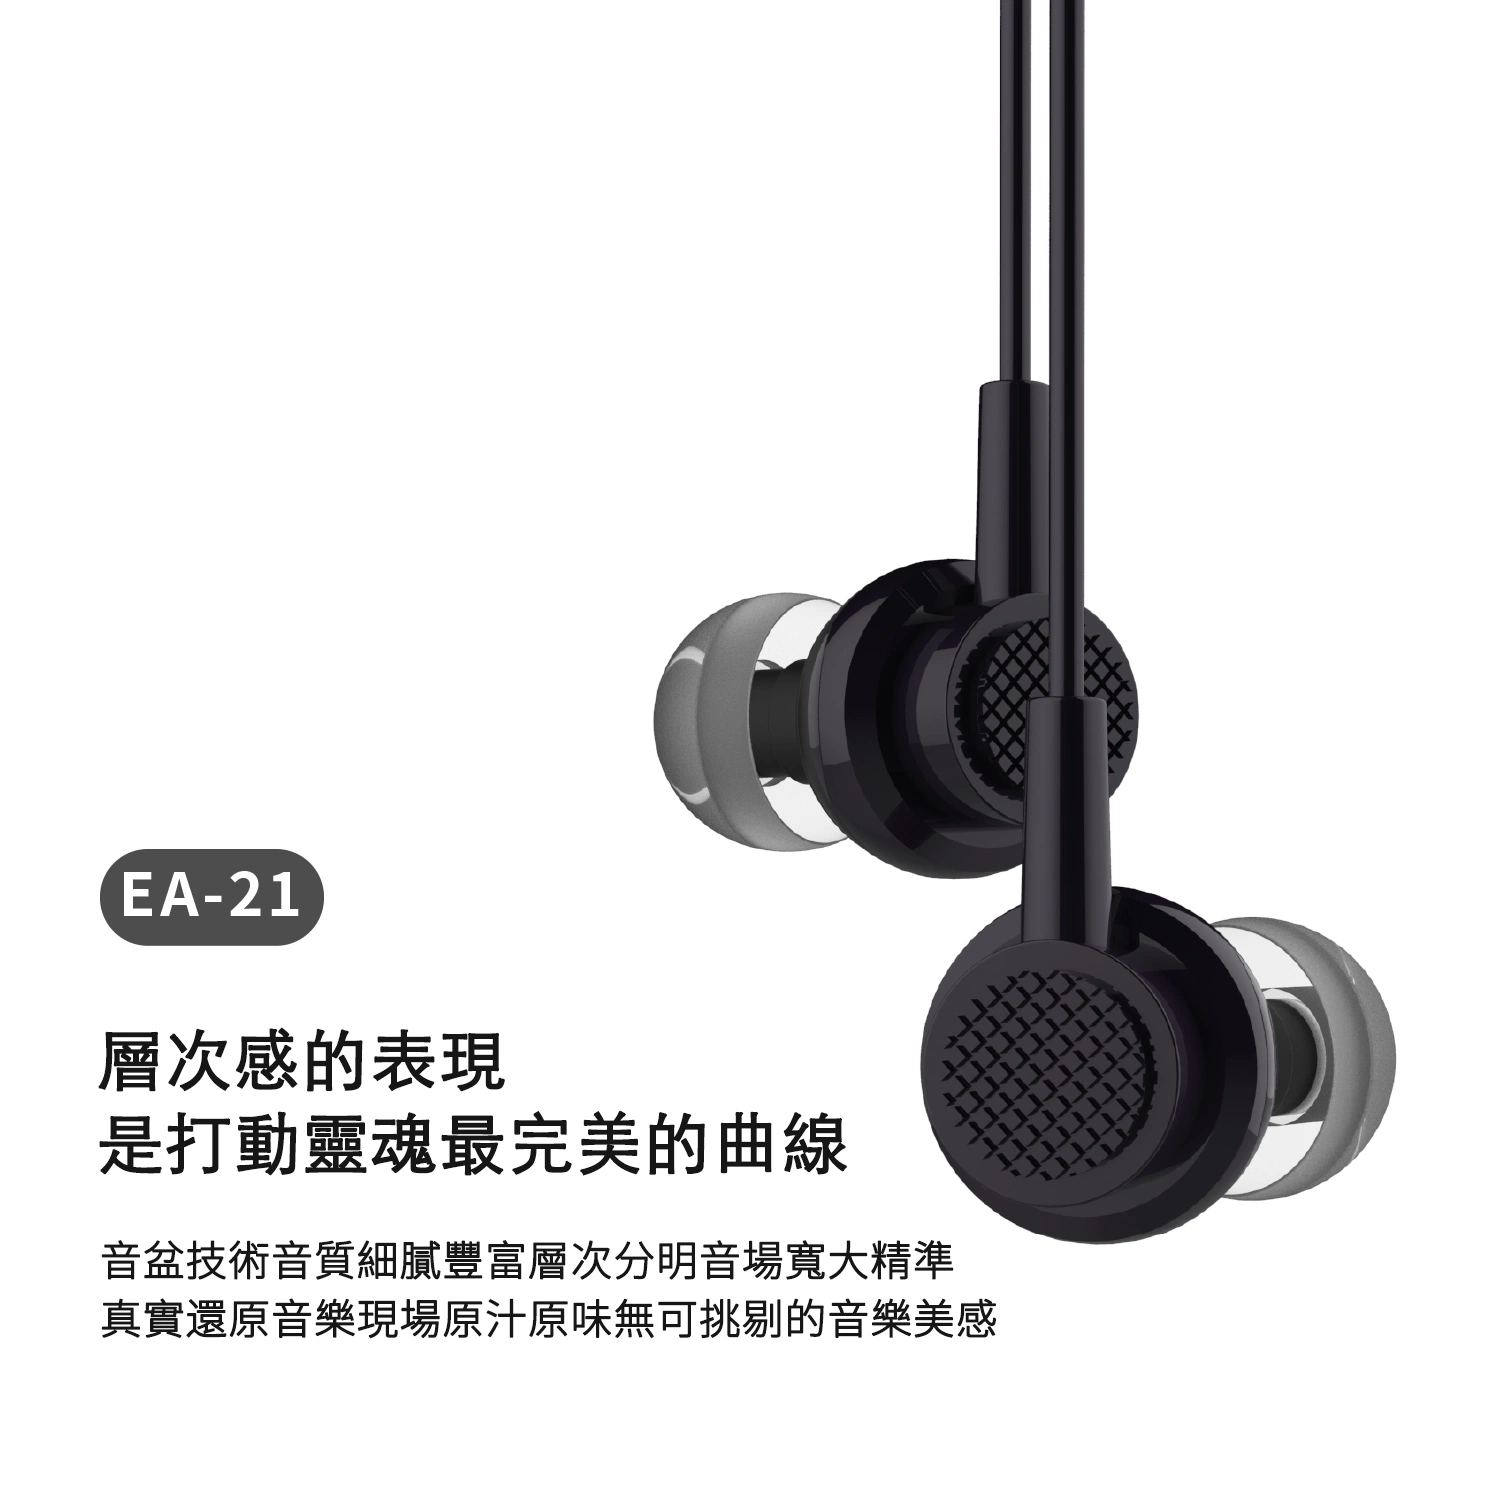 Favorable Price Handsfree in Ear Wired Earphone with Mic for Mobile Phone